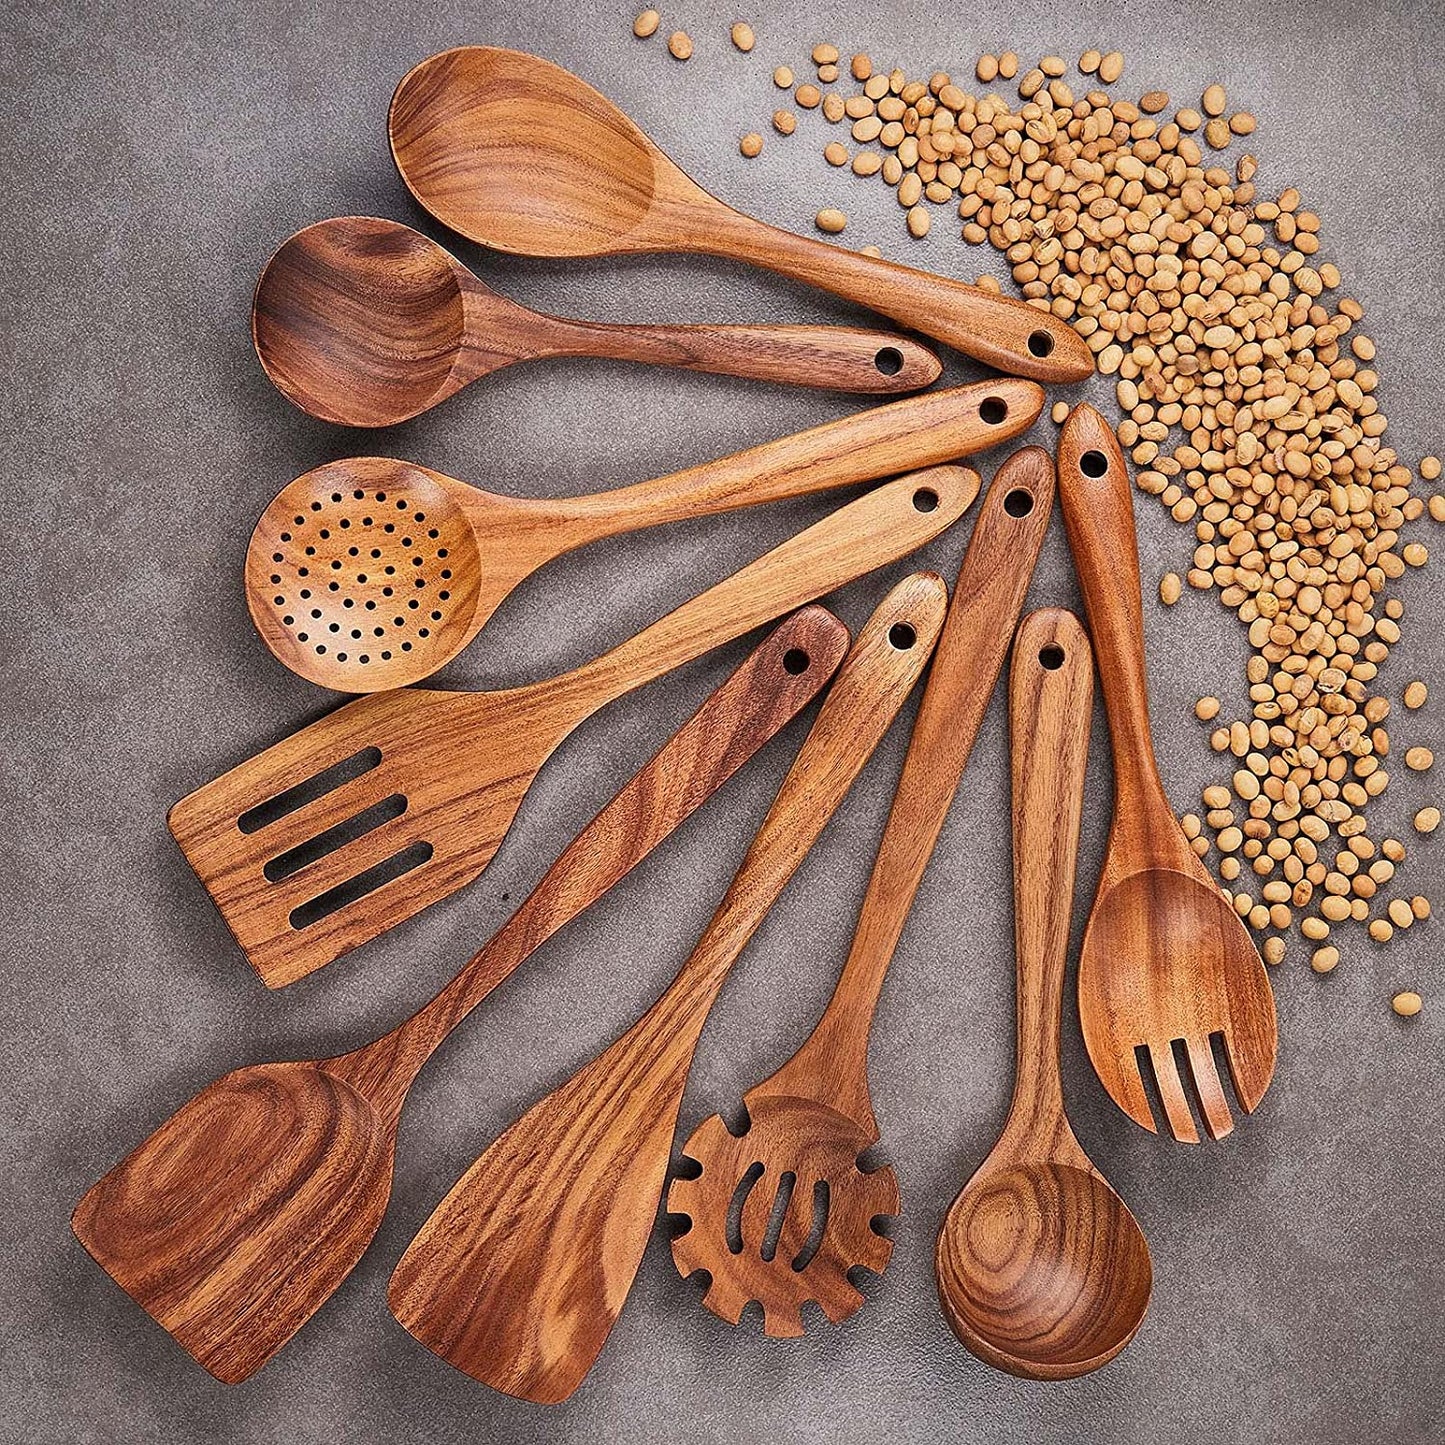 Wooden Kitchen Utensils Set, 9 PCE Natural Teak Wooden Spoons for Non-Stick Pan for Cooking,